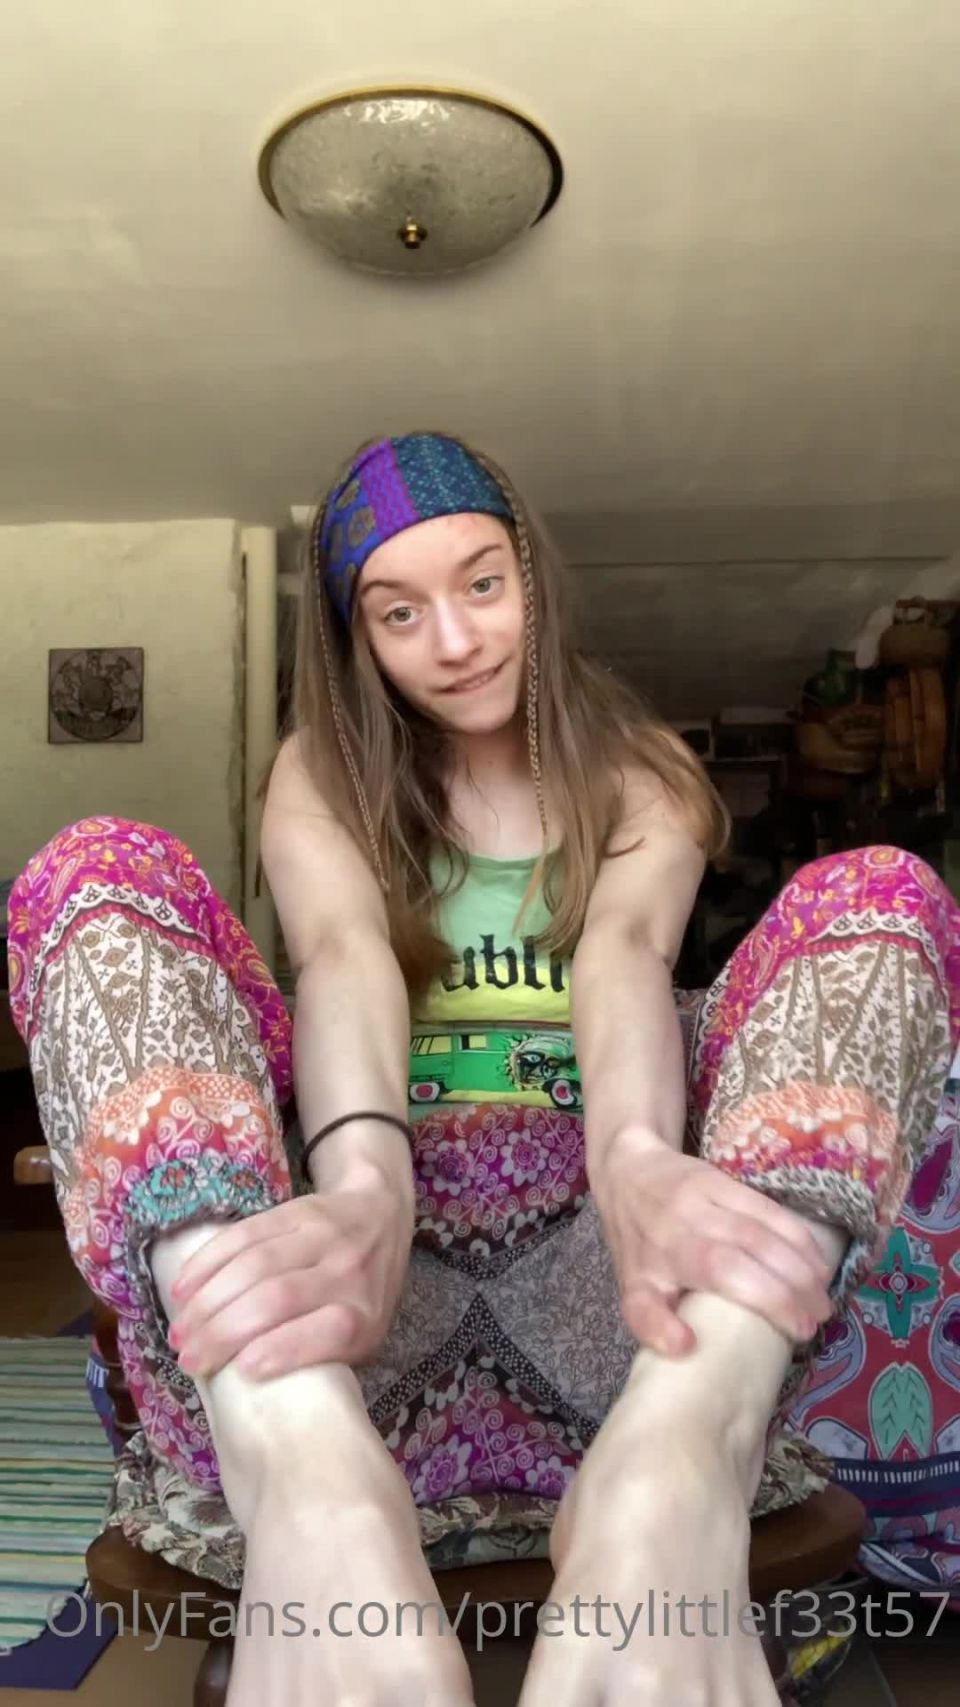 Jade Fiorella - prettylittlef33t57 () Prettylittleft - soles soles soles come get your hot and ready soft goddess soles 04-05-2022